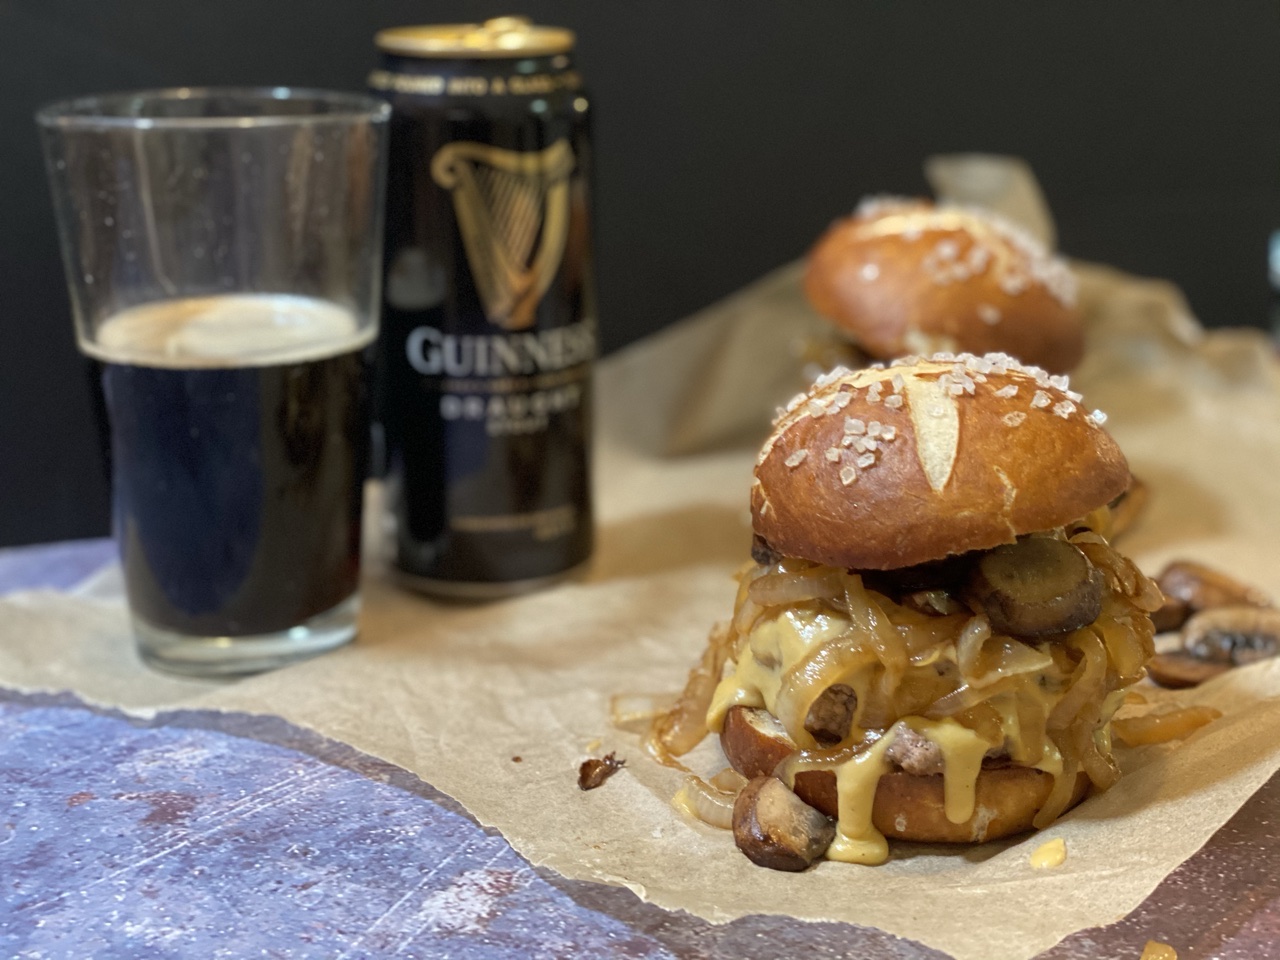 4B653912 CA6A 435F 9D3C 5C79DF67AE28 - Guinness Blue Cheese Burgers with Guinness Cheddar & Caramelized Onions & Mushrooms